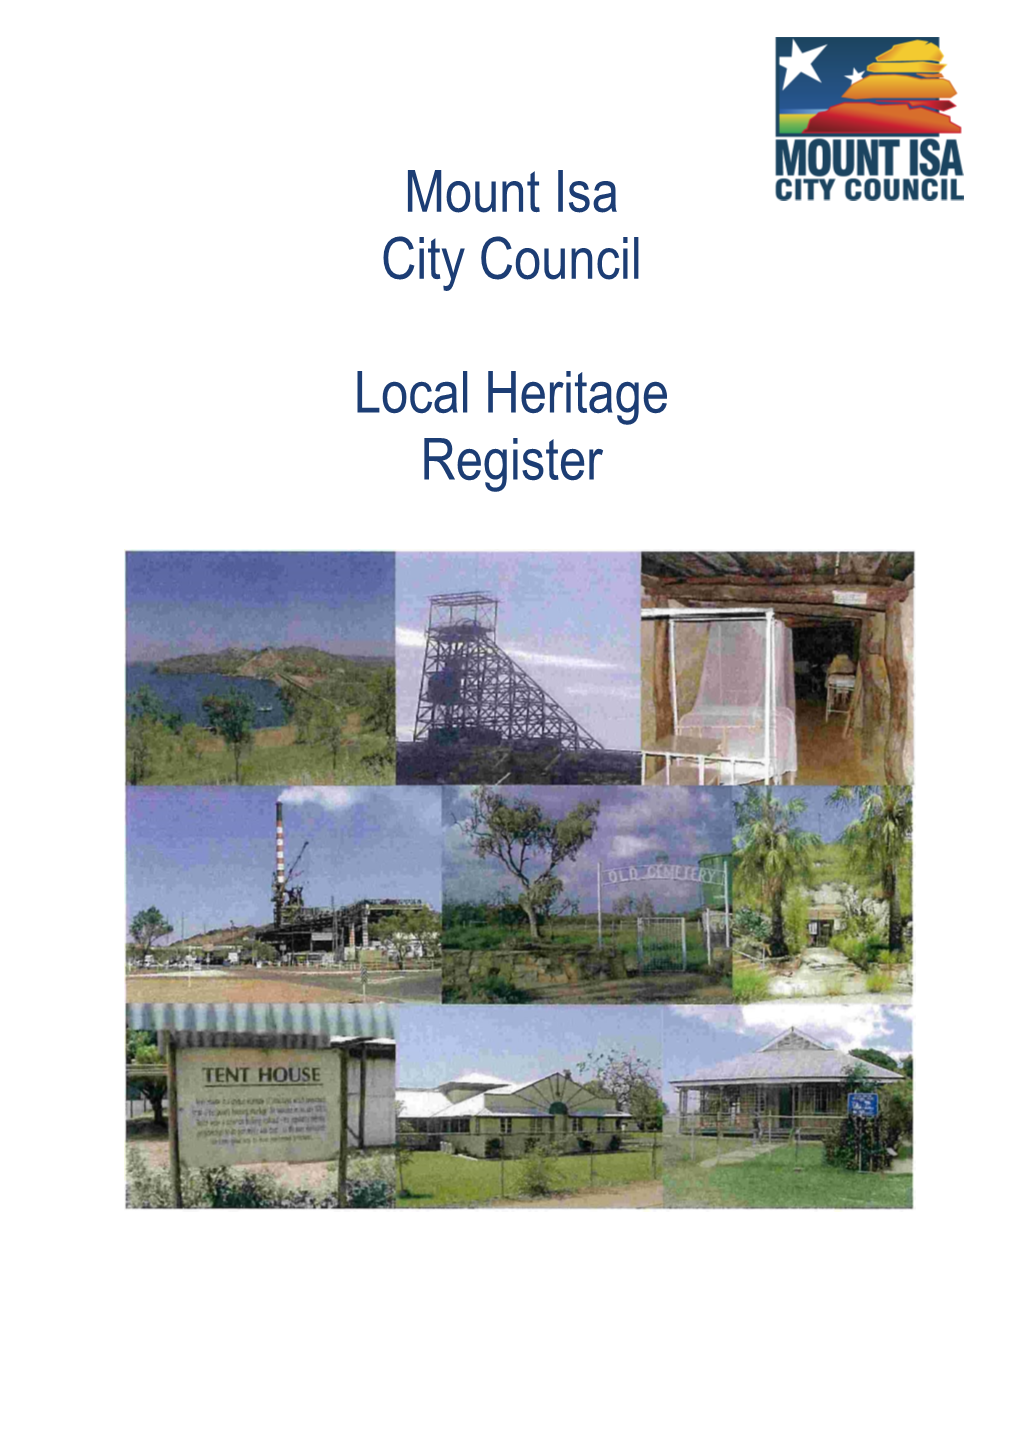 Mount Isa City Council Local Heritage Register